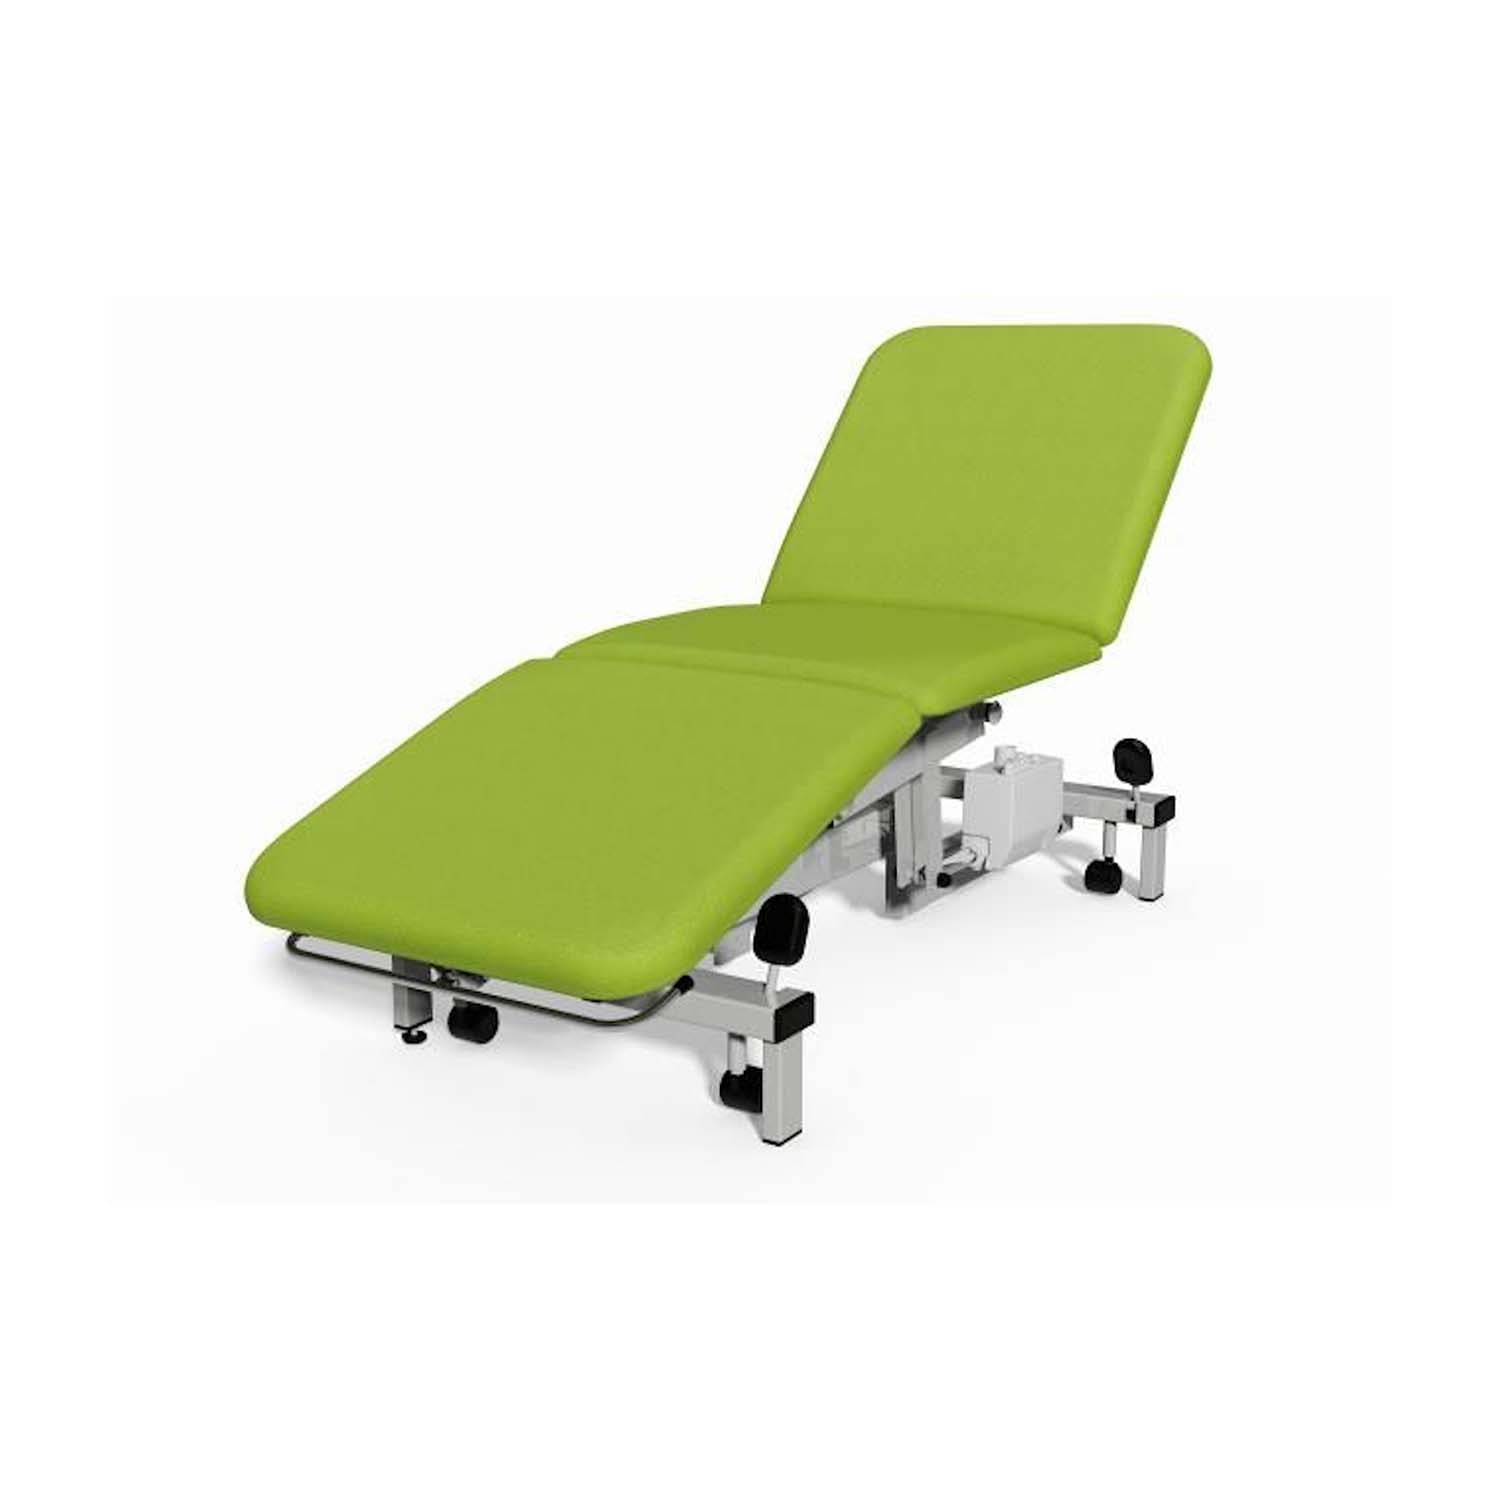 Plinth 2000 Model 503 3 Section Examination Couch | Hydraulic | Citrus Green